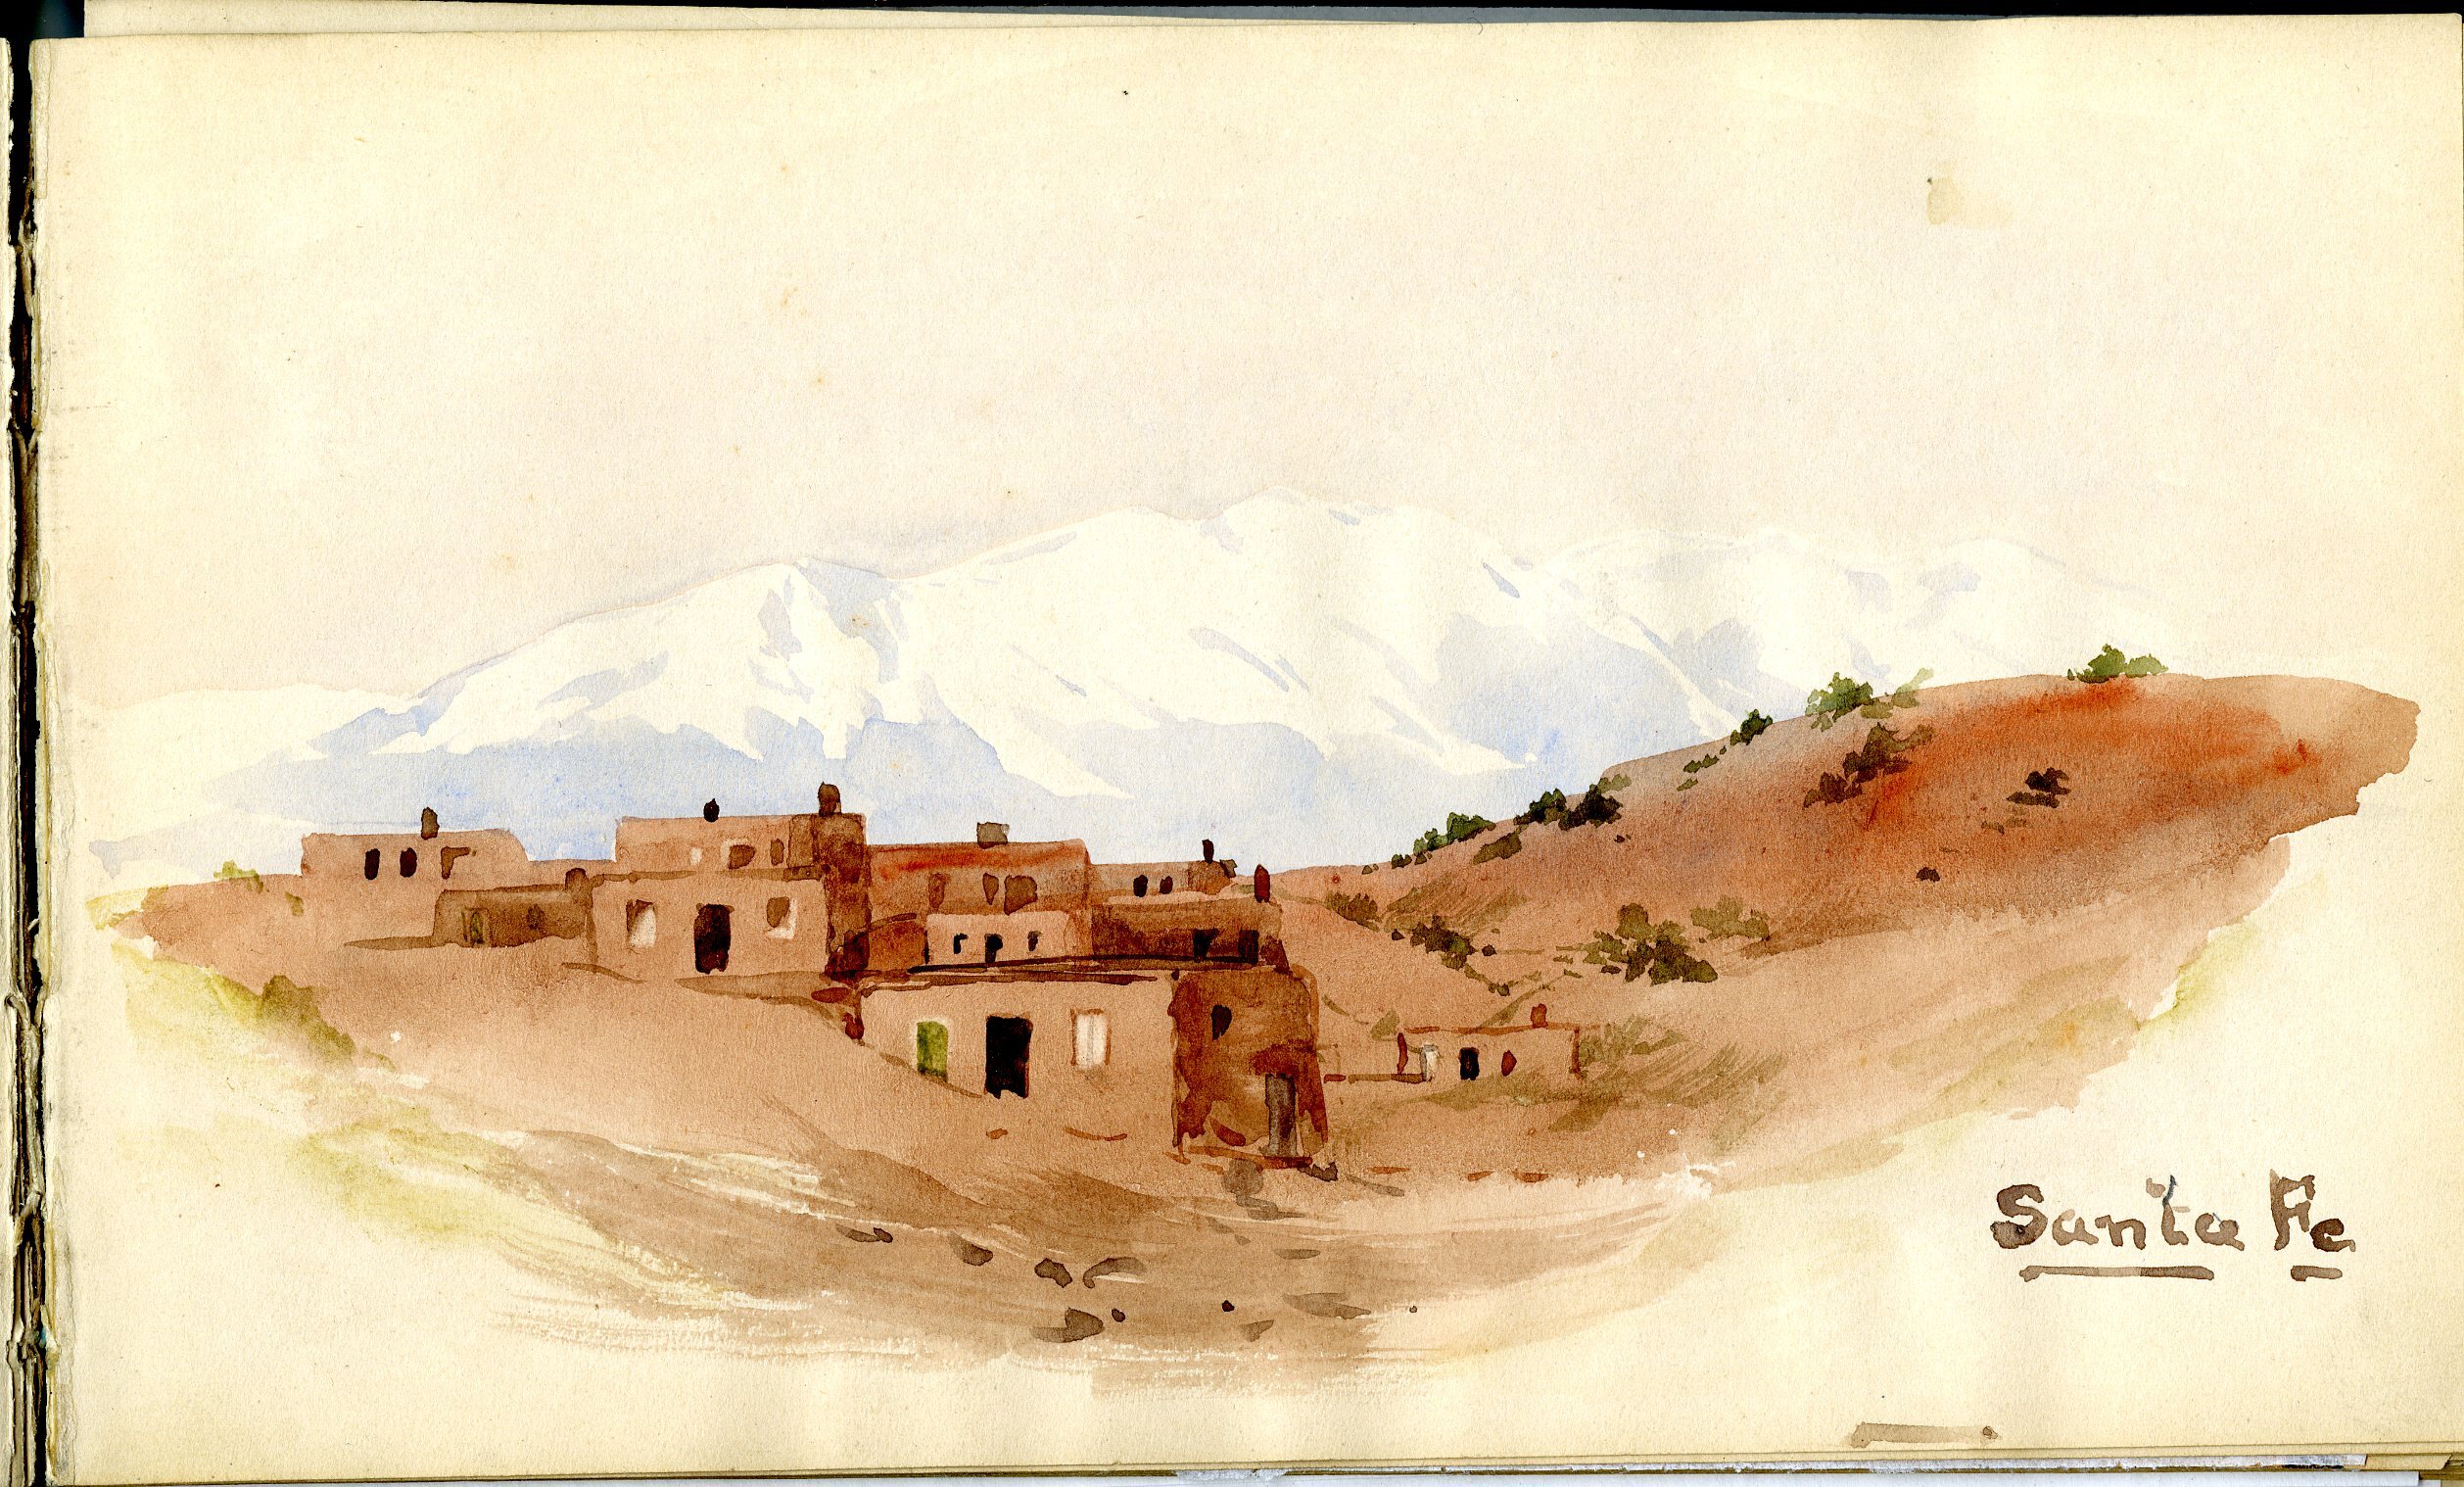 Landscape of Santa Fe with low adobe buildings on adobe-colored hills.  White mountain range in background.